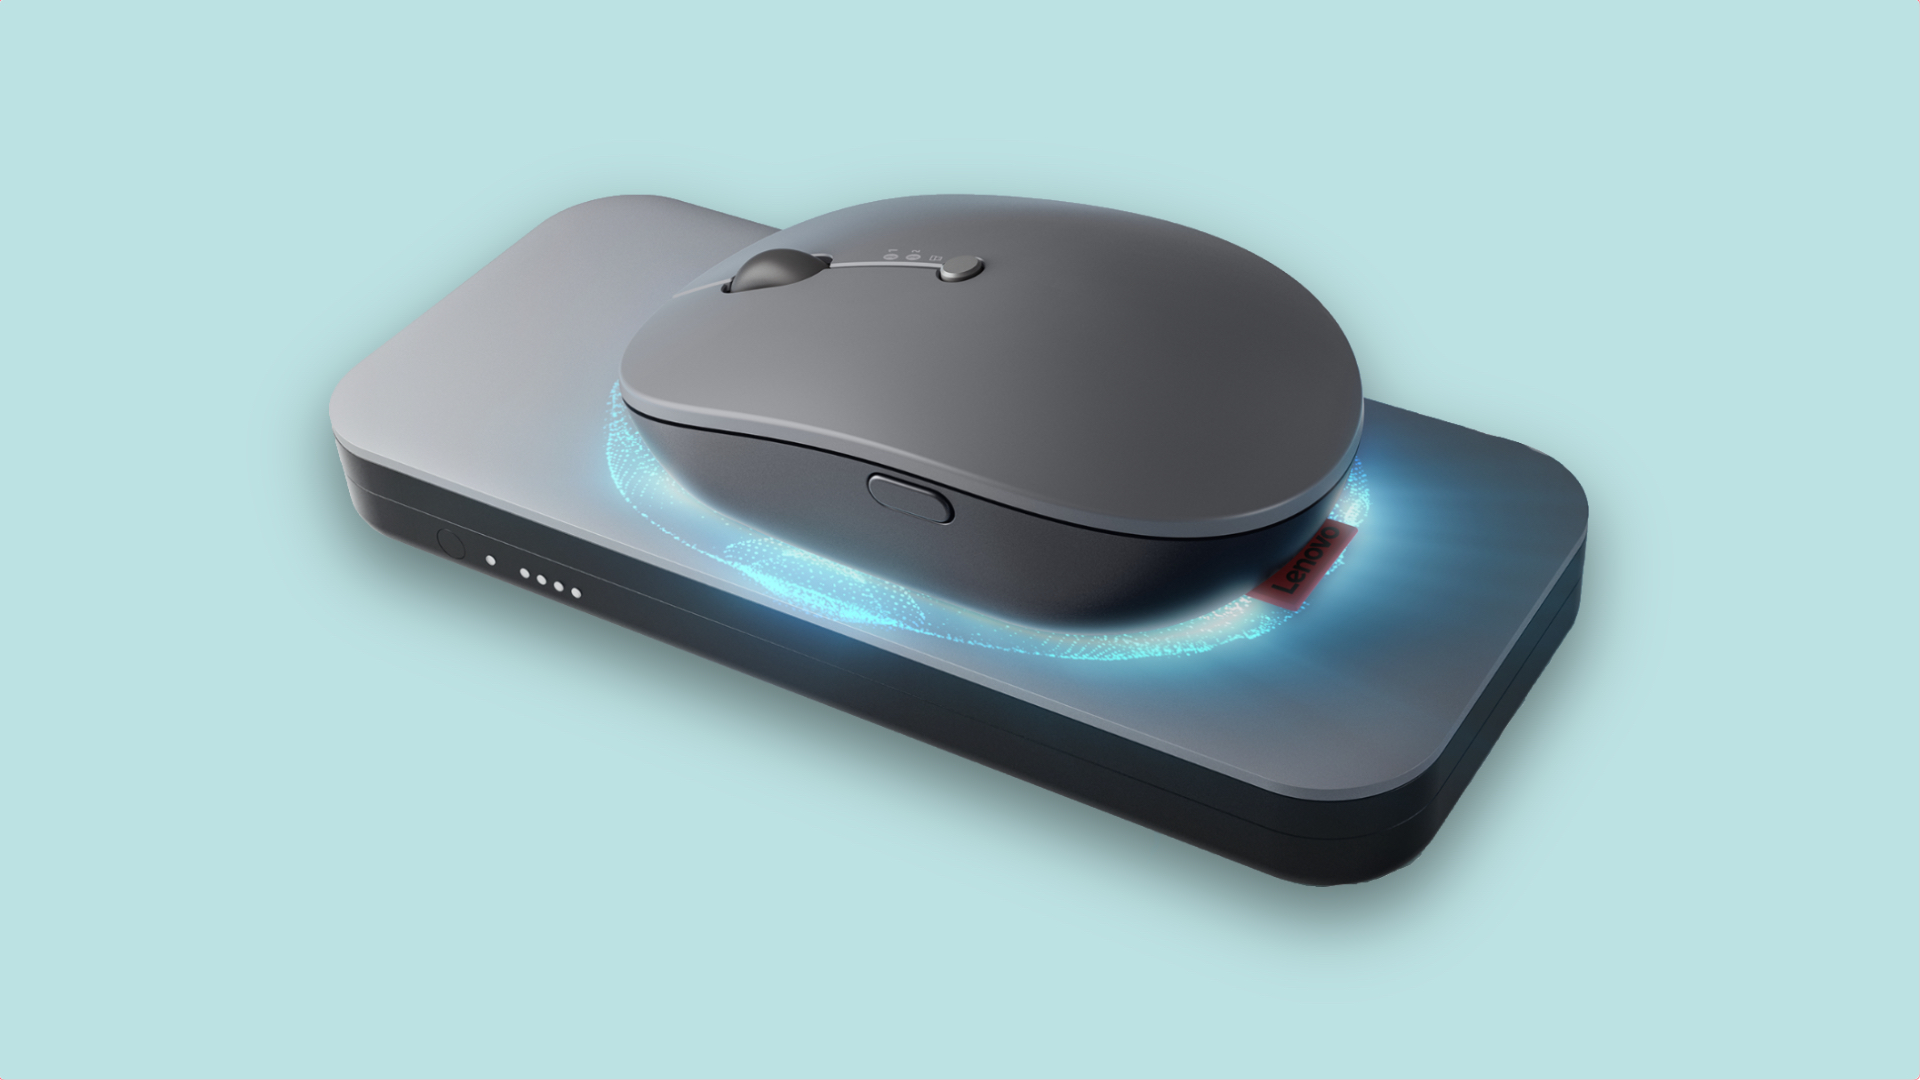 Lenovo's new mouse features a wireless charging that Apple's Magic Mouse  should have - 9to5Mac